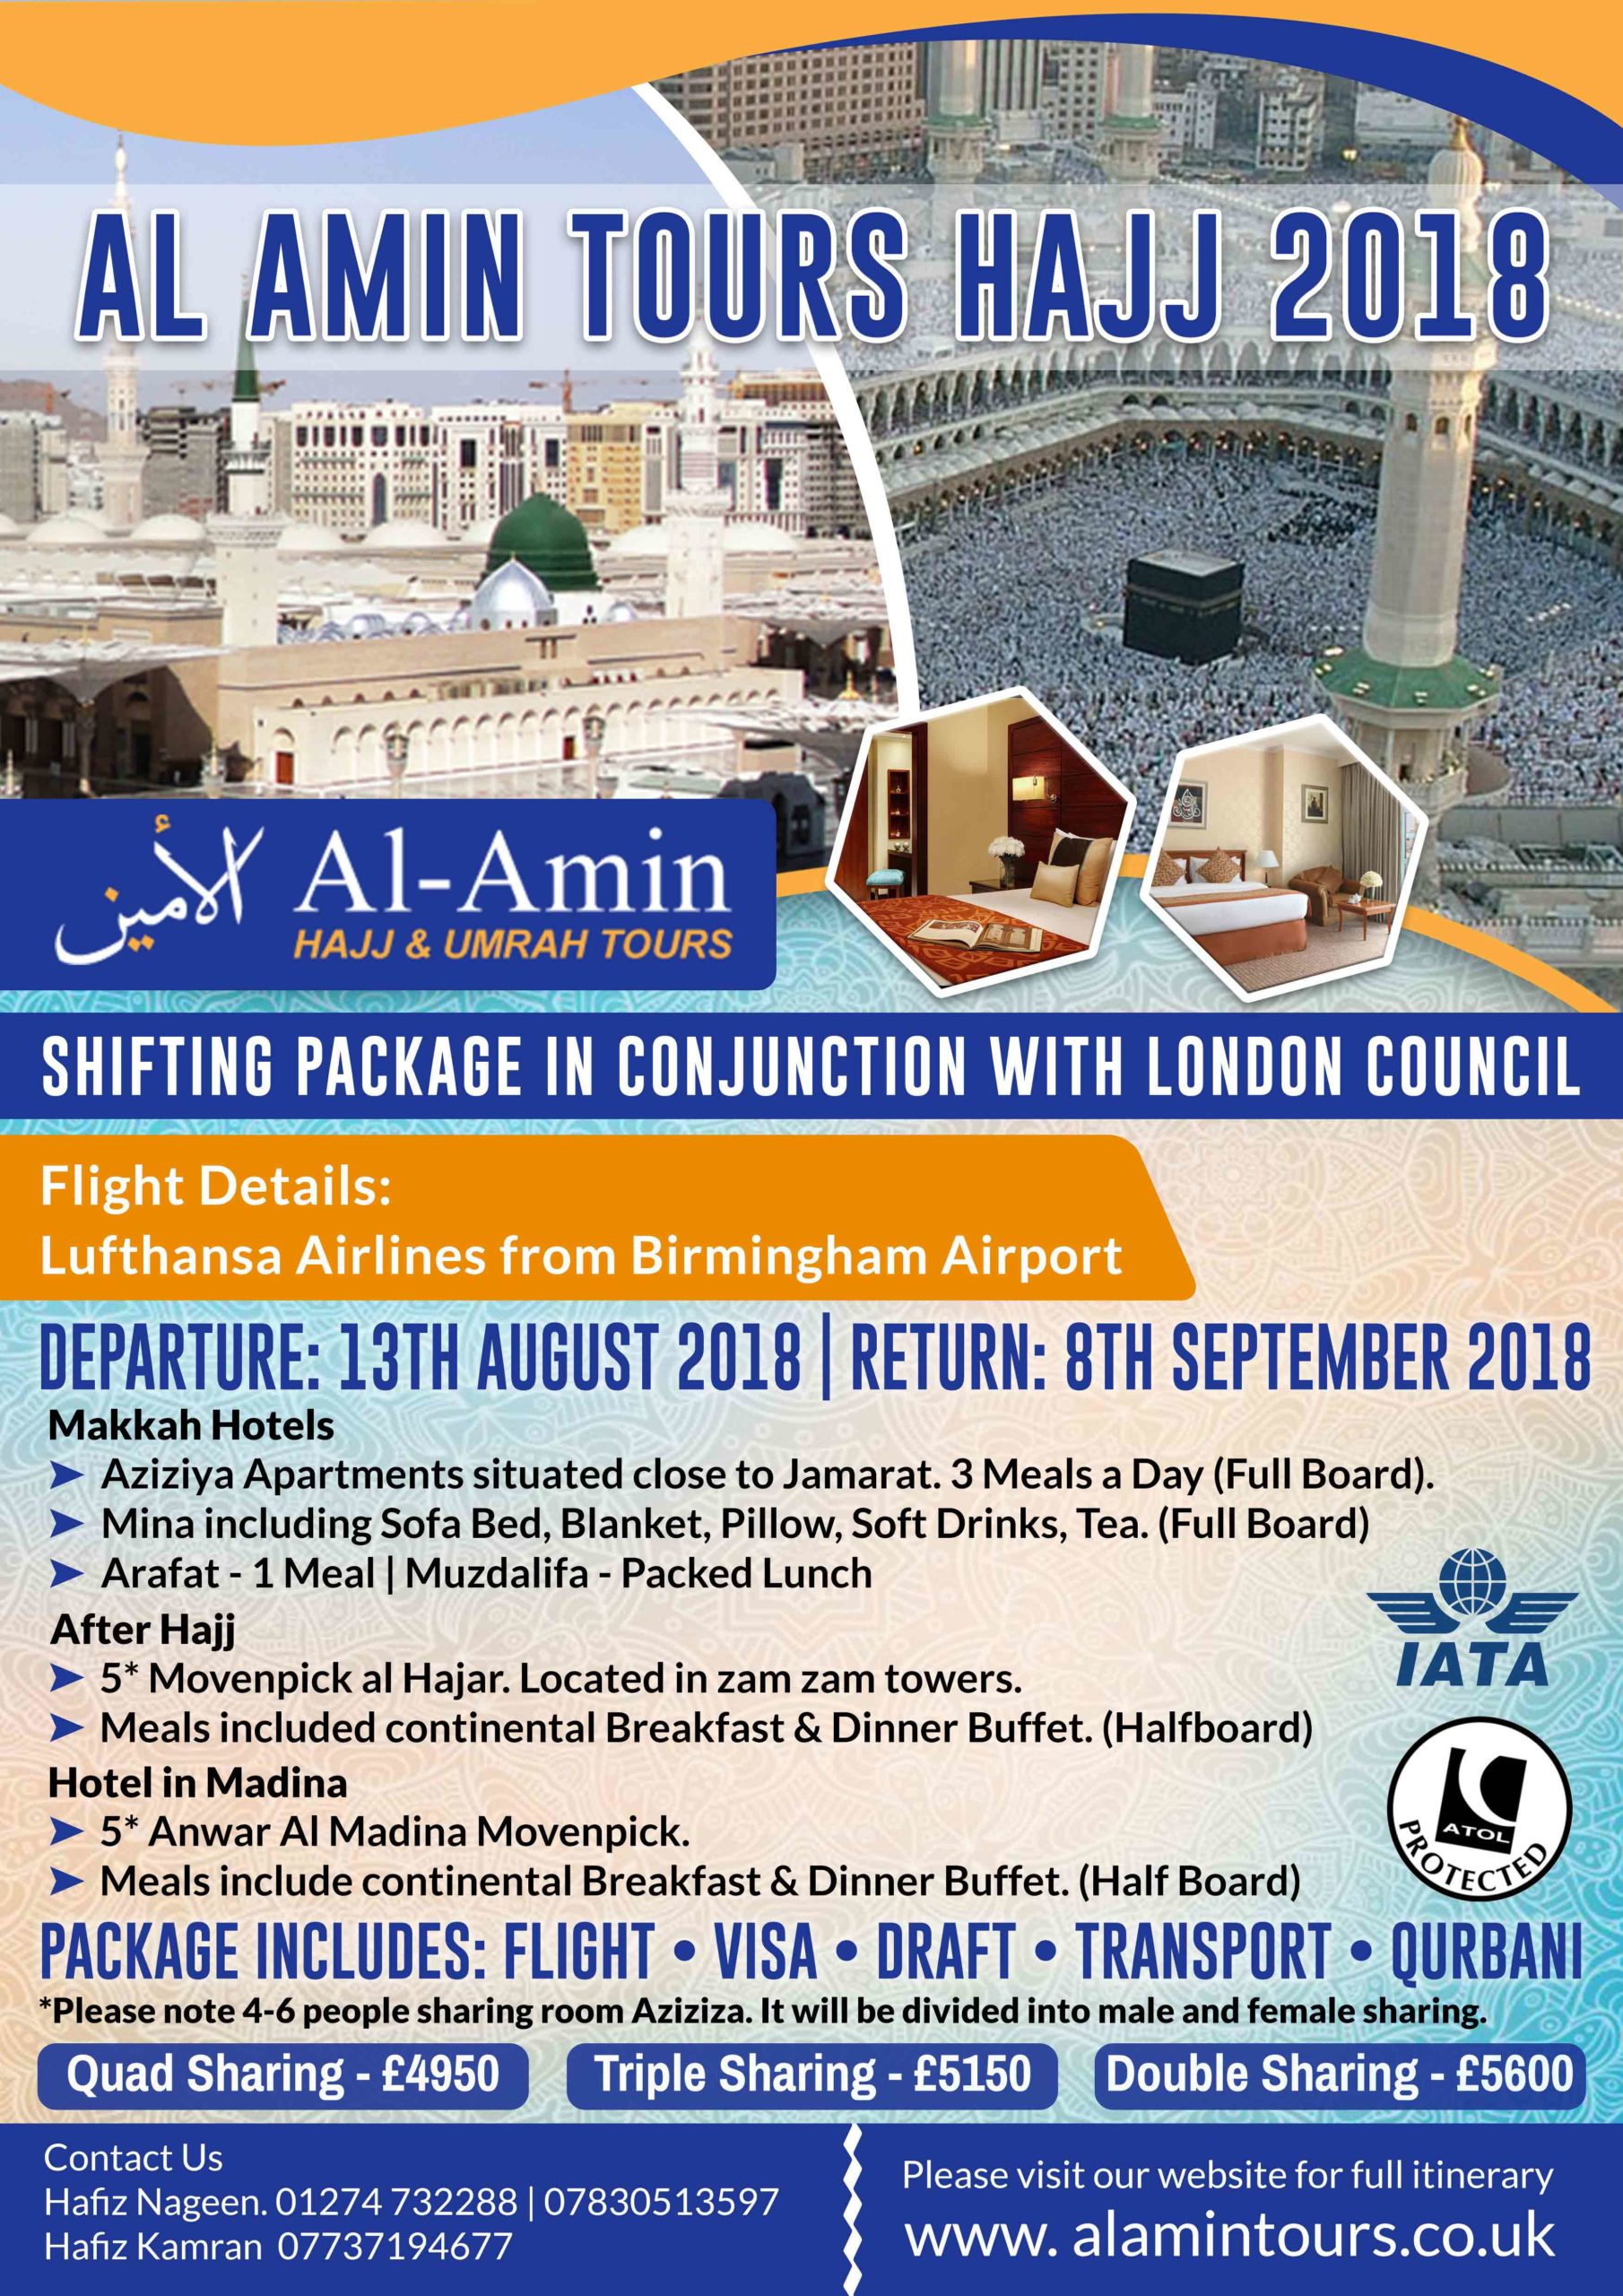 al amin tours and travel